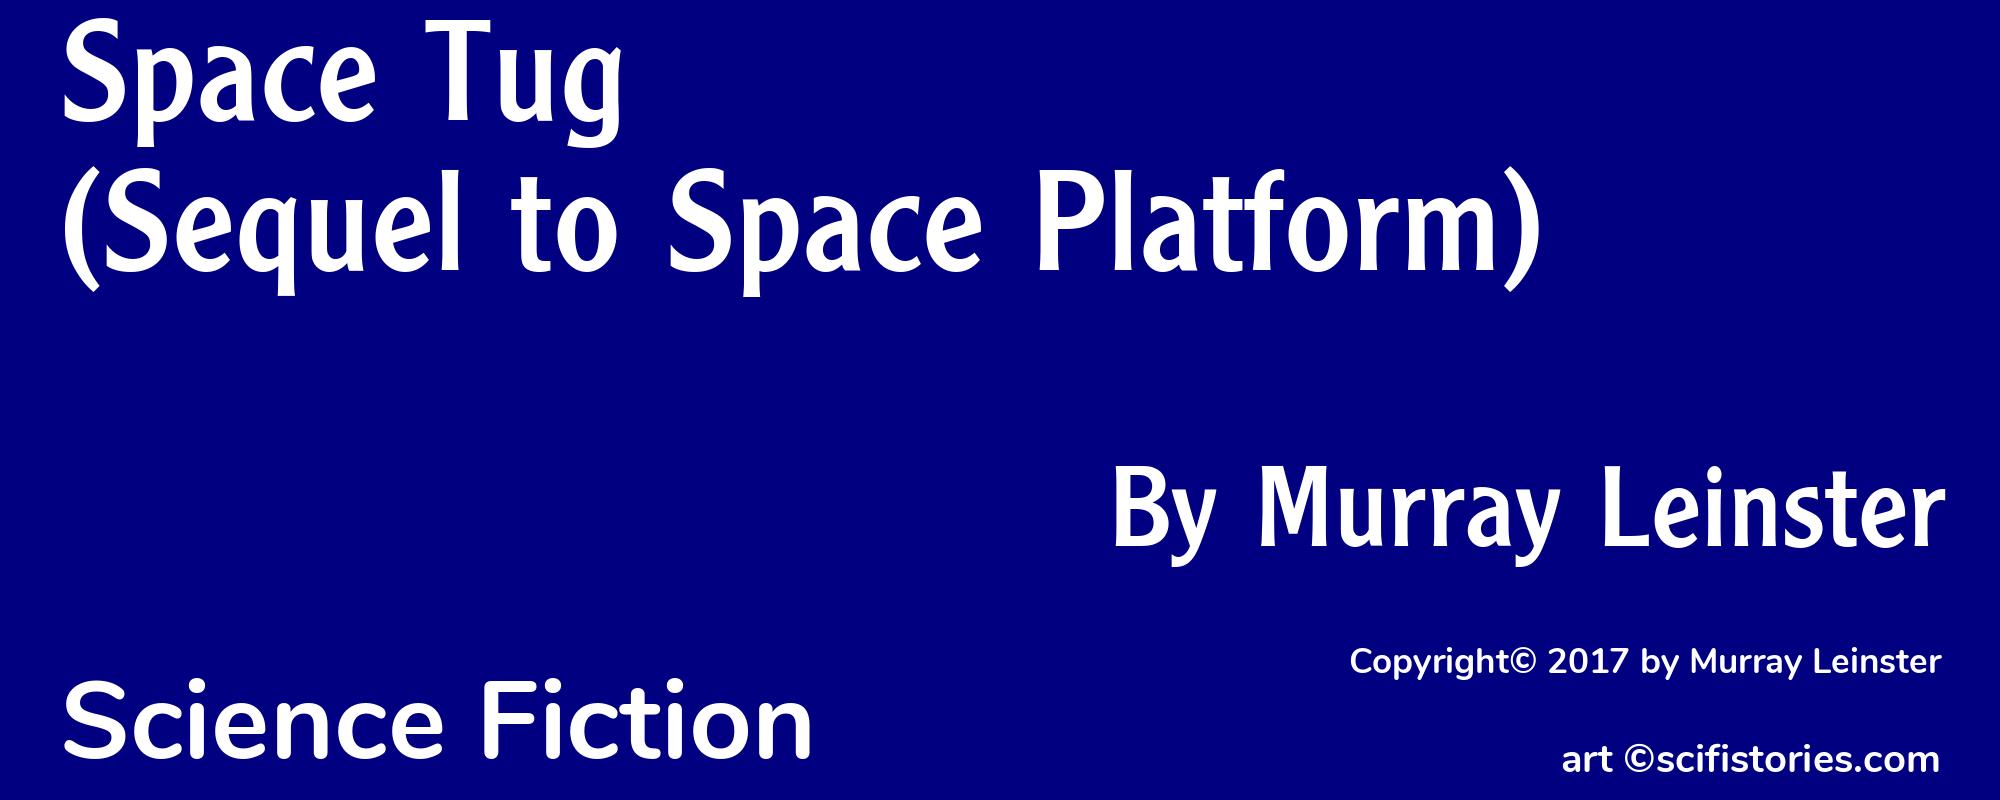 Space Tug (Sequel to Space Platform) - Cover